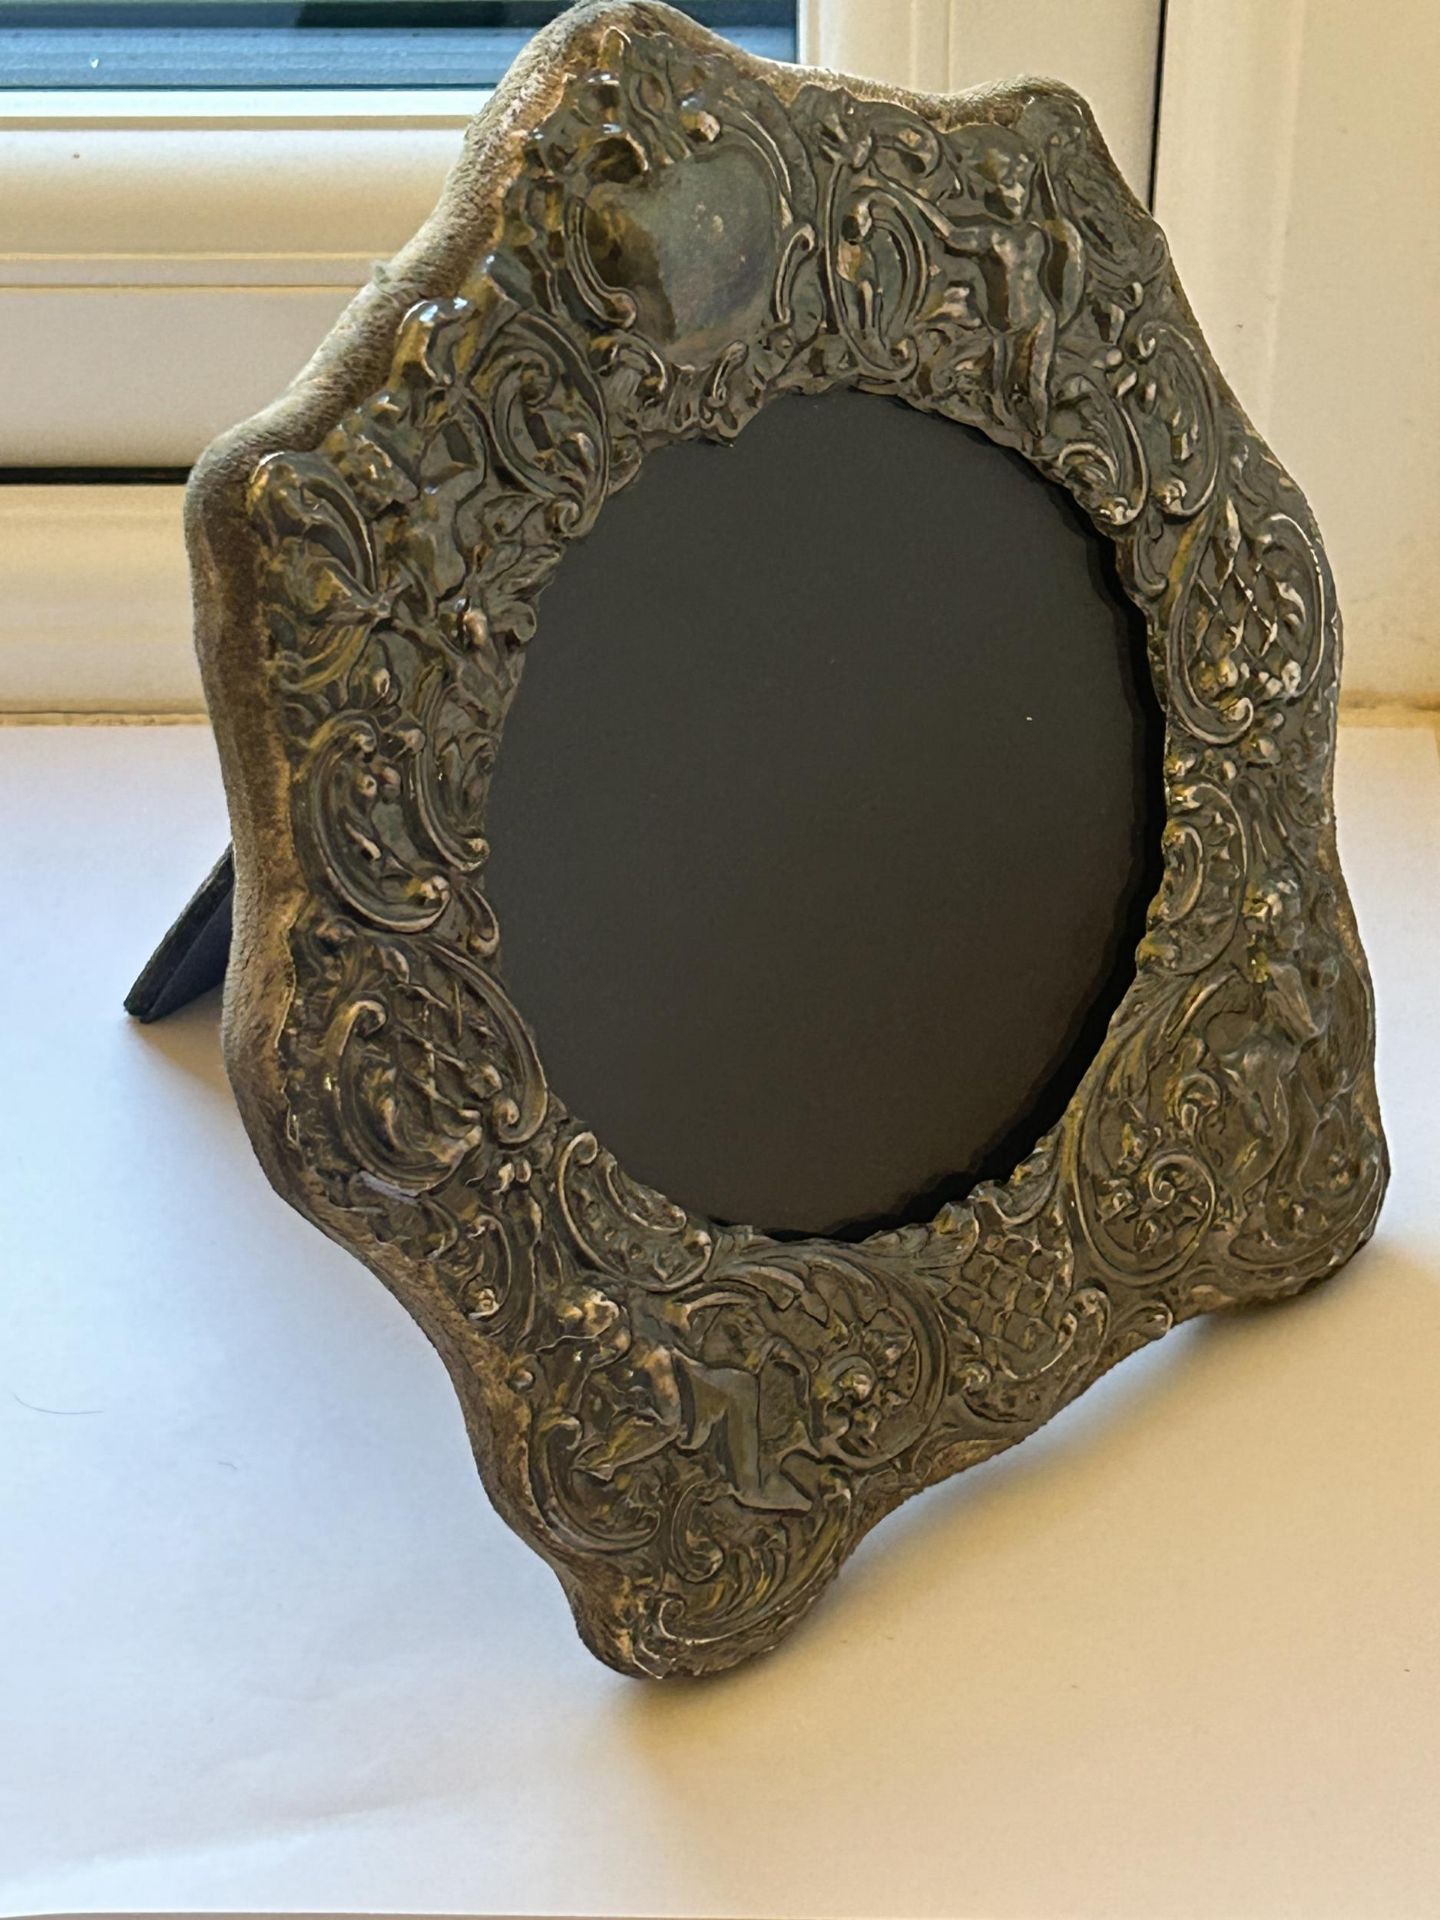 A VINTAGE HALLMARKED LONDON SILVER PHOTO FRAME WITH CHERUB DECORATION HEIGHT 18CM, WIDTH 17CM - Image 5 of 5